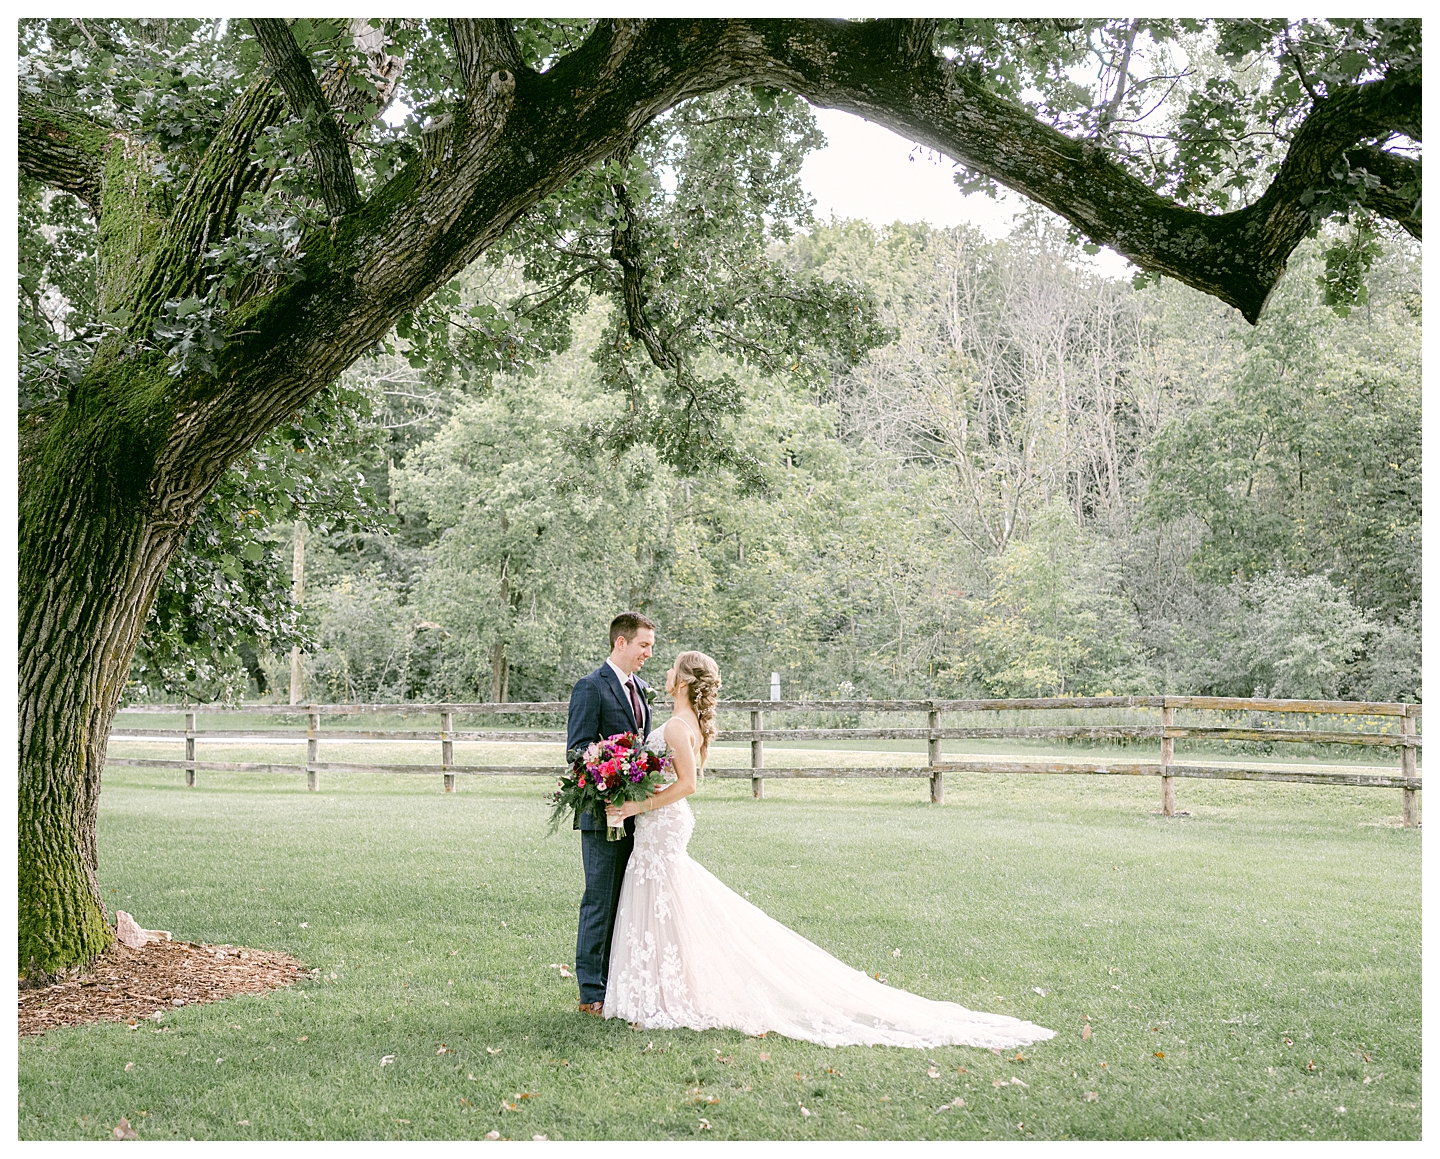 A bride and groom's portrait at a Mayowood Stone Barn Wedding. Photo by Kayla Lee.